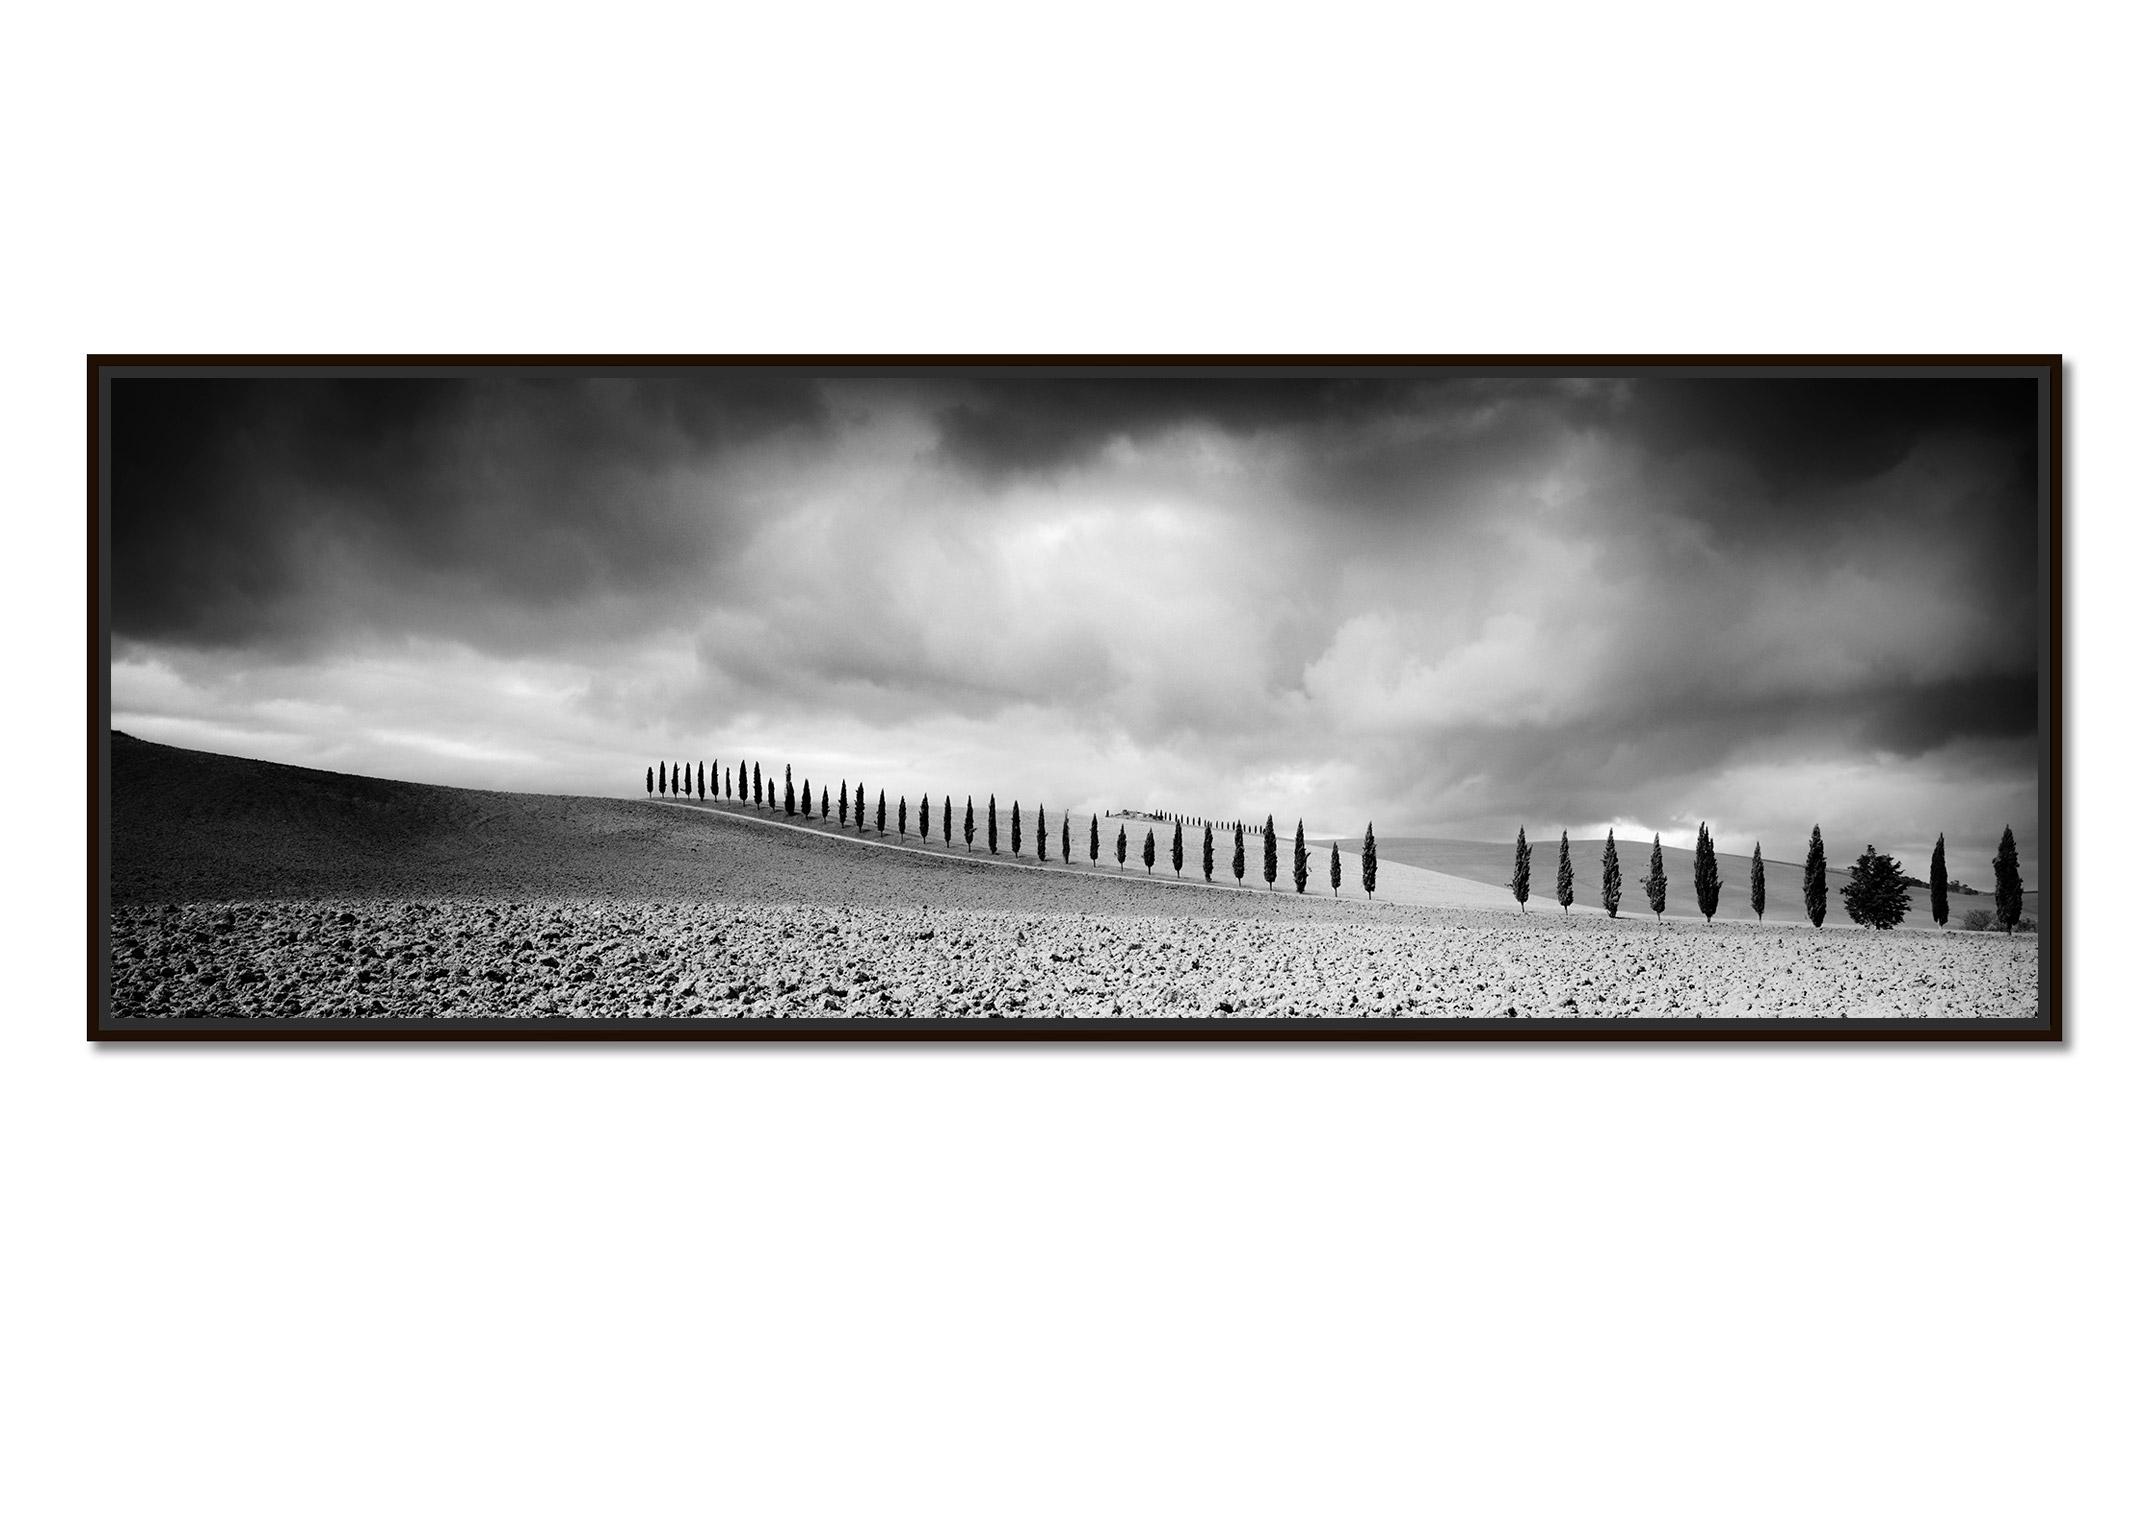 Cypress Tree Avenue, Panorama, Tuscany, black and white photography, landscape - Photograph by Gerald Berghammer